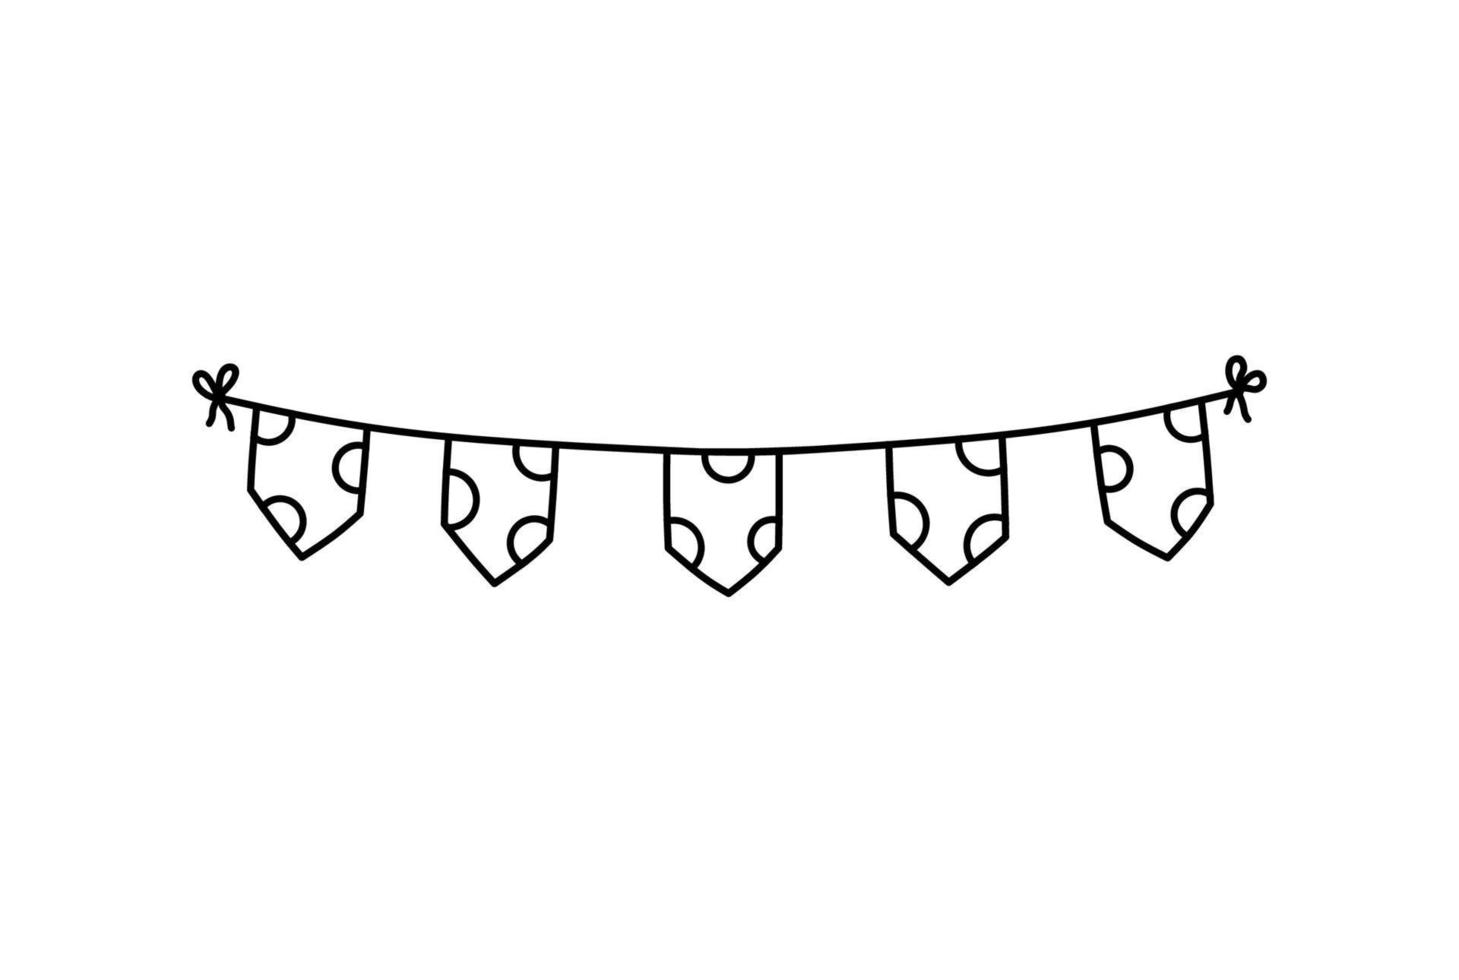 Cute festive bunting for a party isolated on white background. Vector hand-drawn illustration in doodle style. Perfect for holiday designs, cards, decorations, logo.